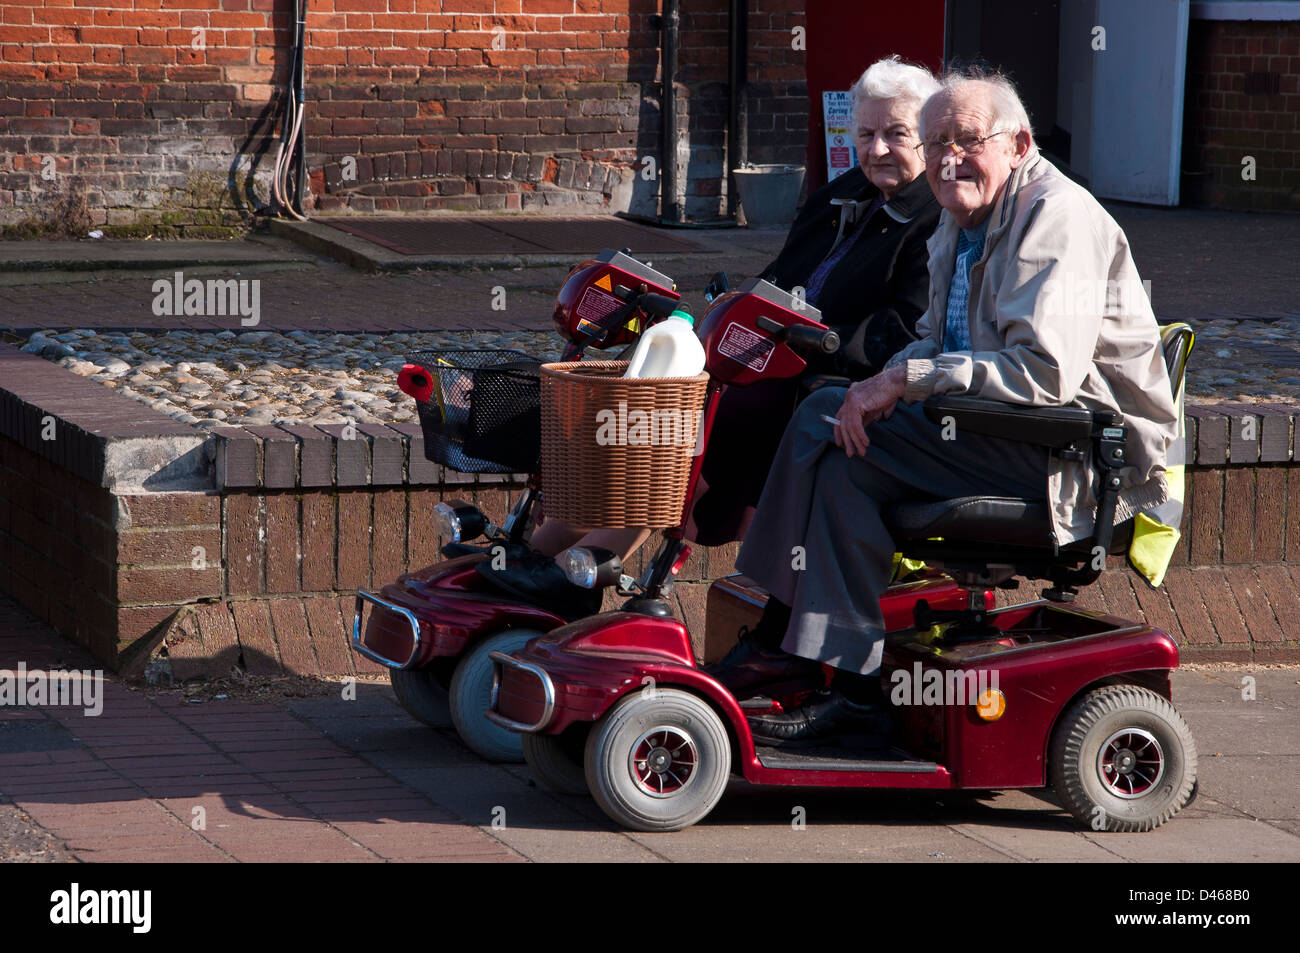 Senior couple pensioners sitting on mobility scooters Stock Photo